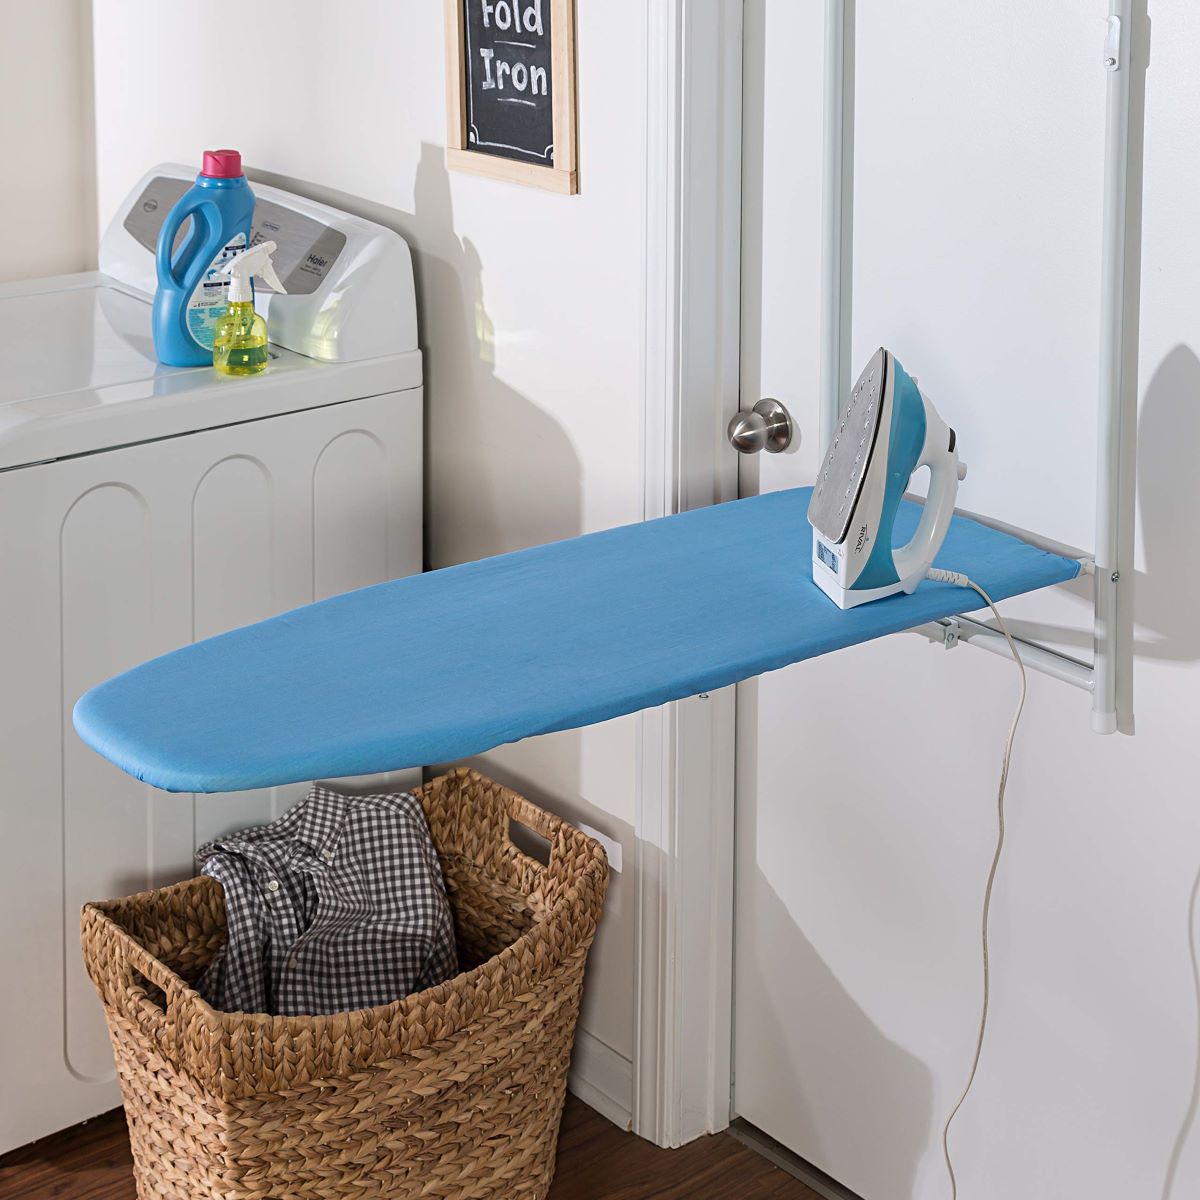 How To Hang An Ironing Board On A Door